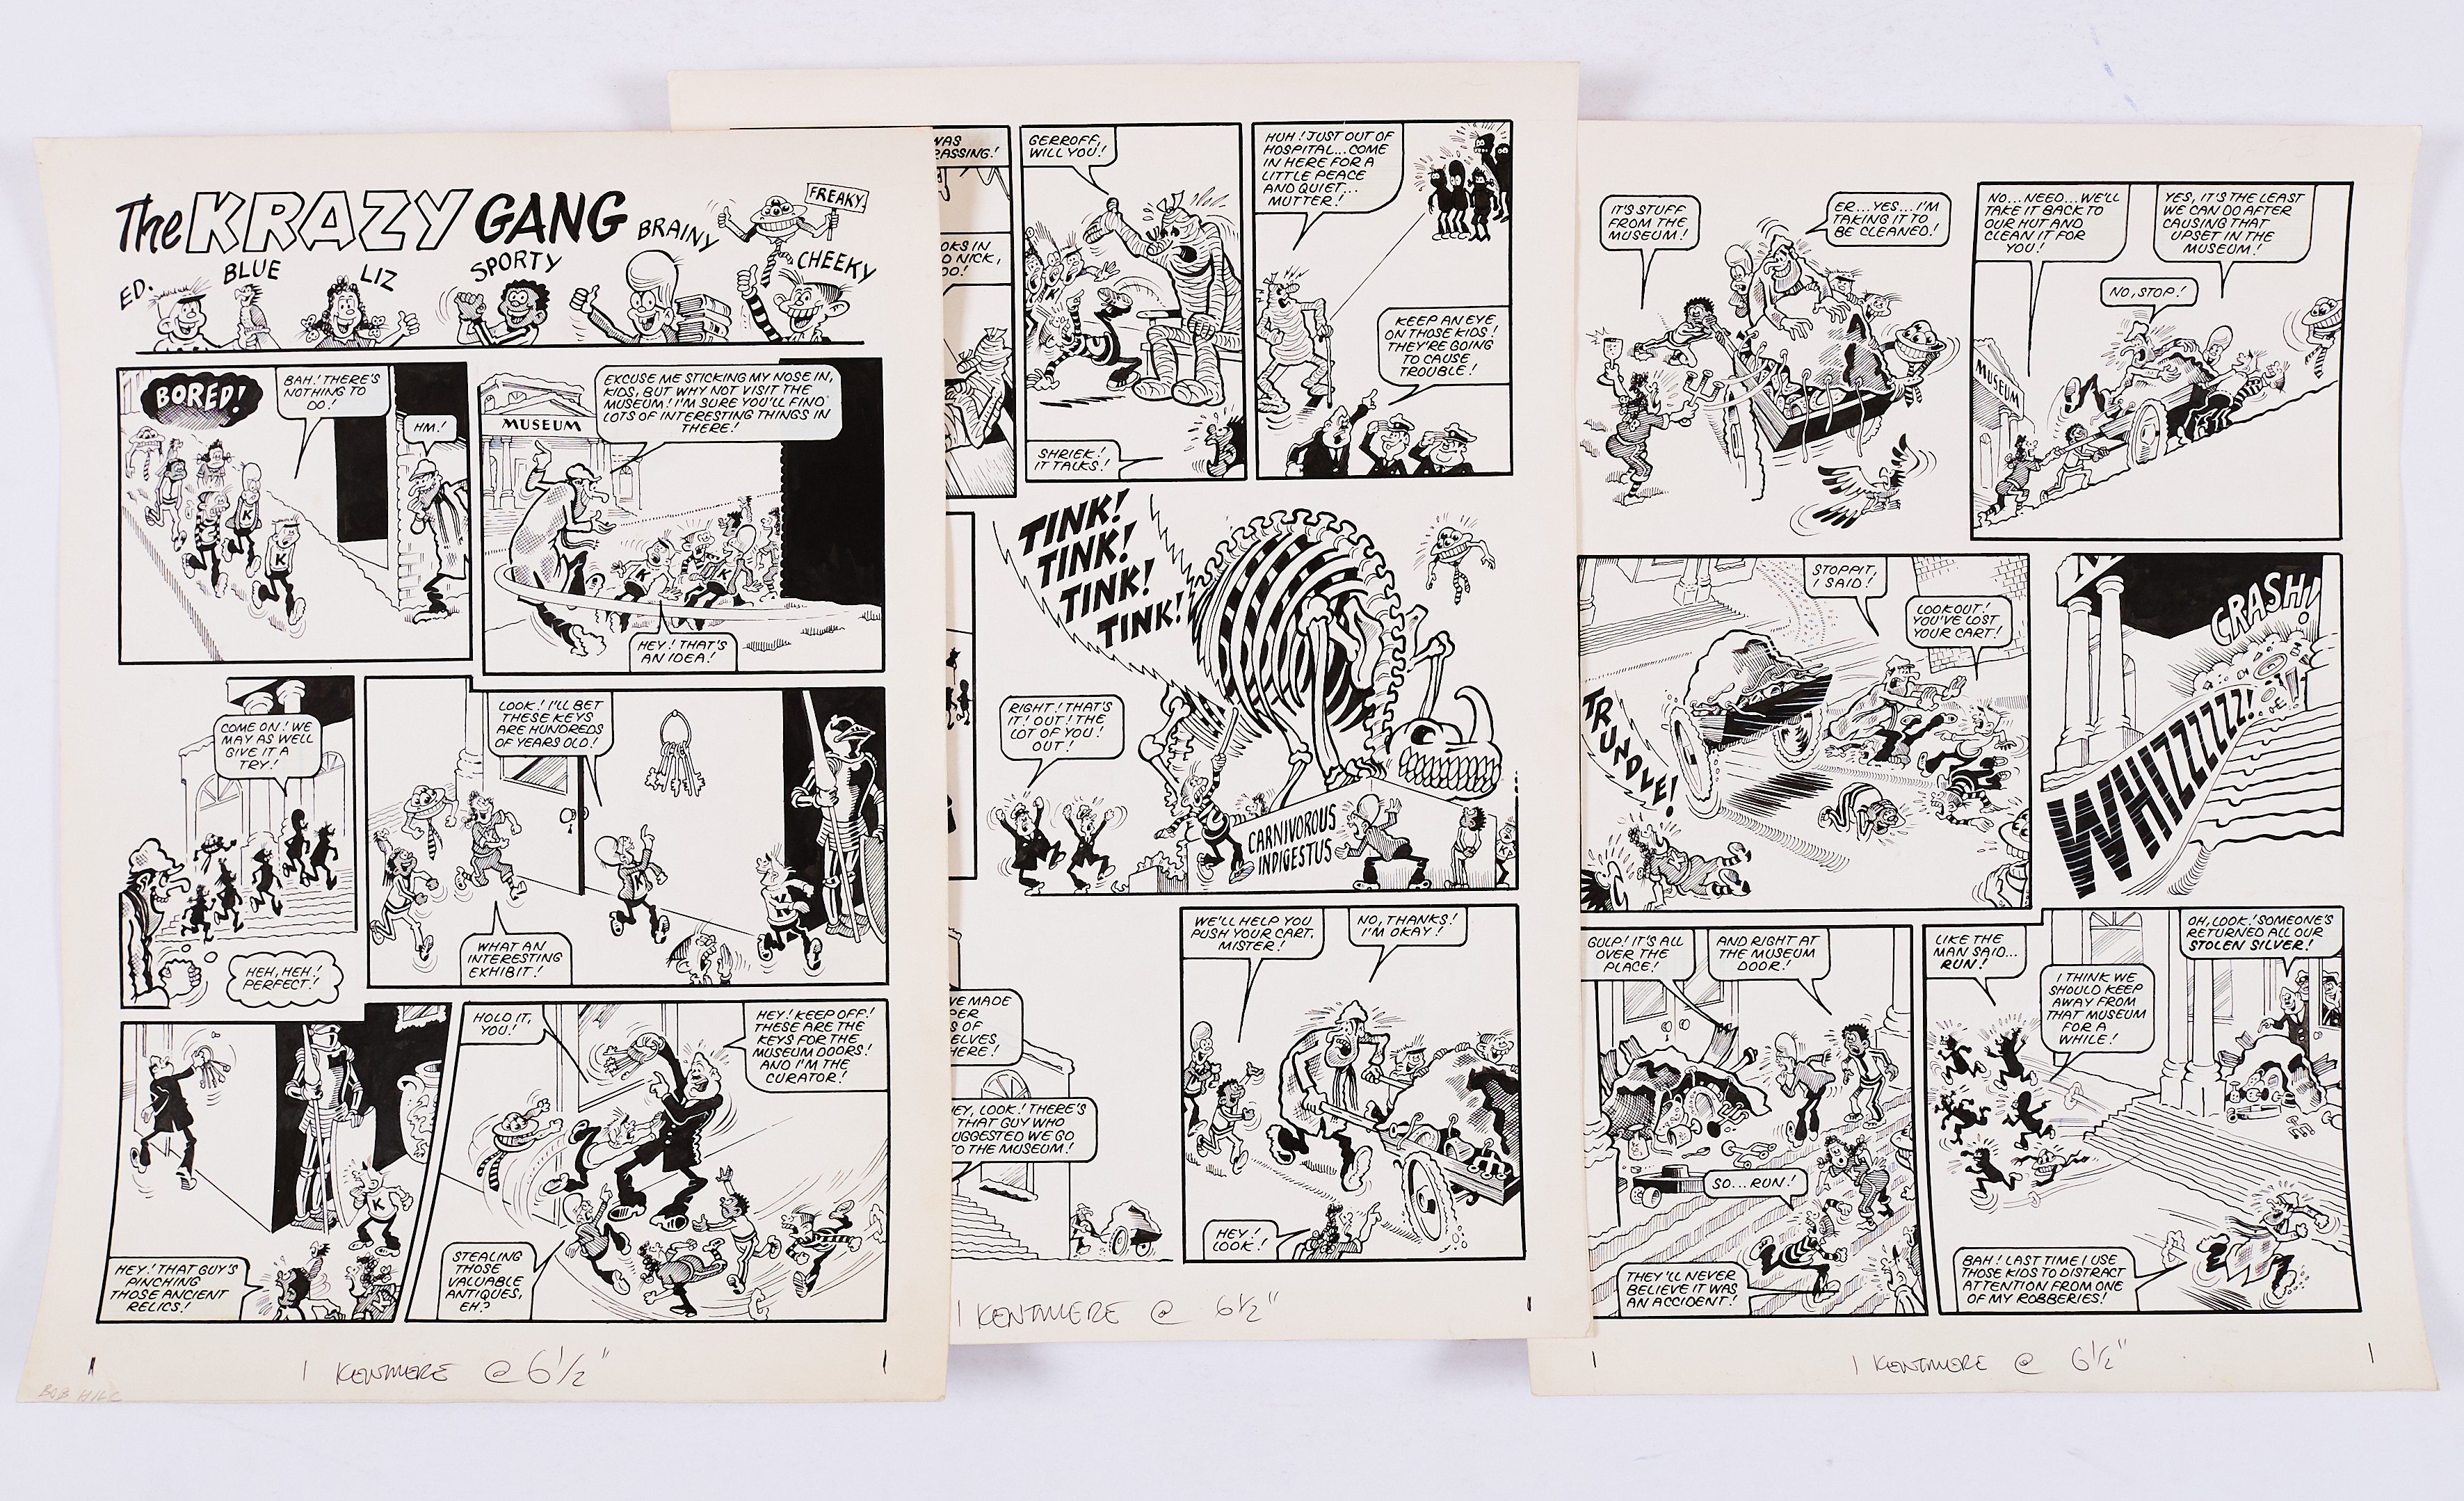 Krazy Gang: 3 original artworks (1978) by Bob Hill from Krazy Comic. From the Bob Monkhouse Archive.